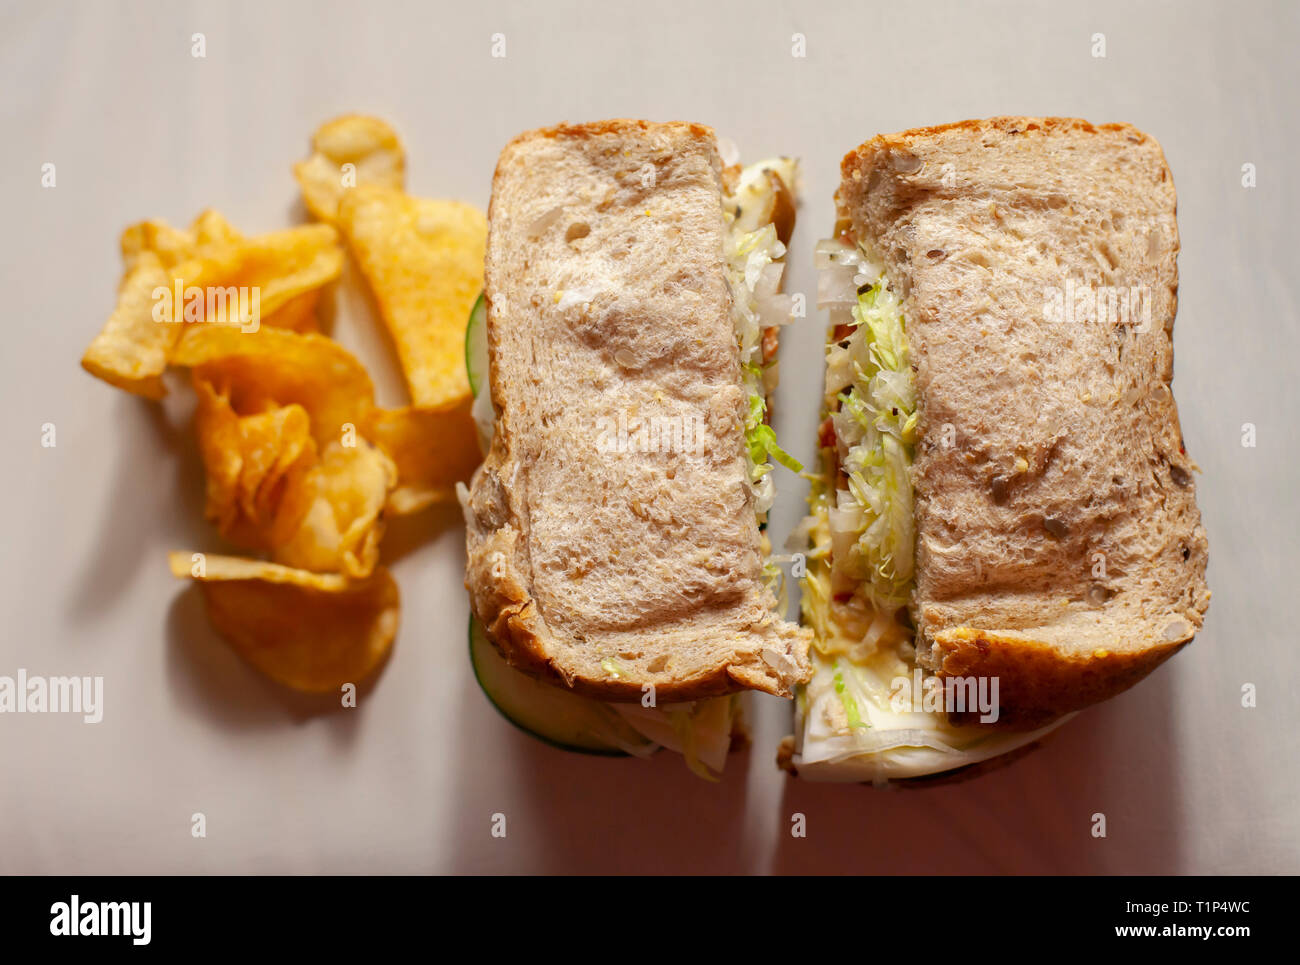 Halved Sandwich and Flavored Chips Stock Photo